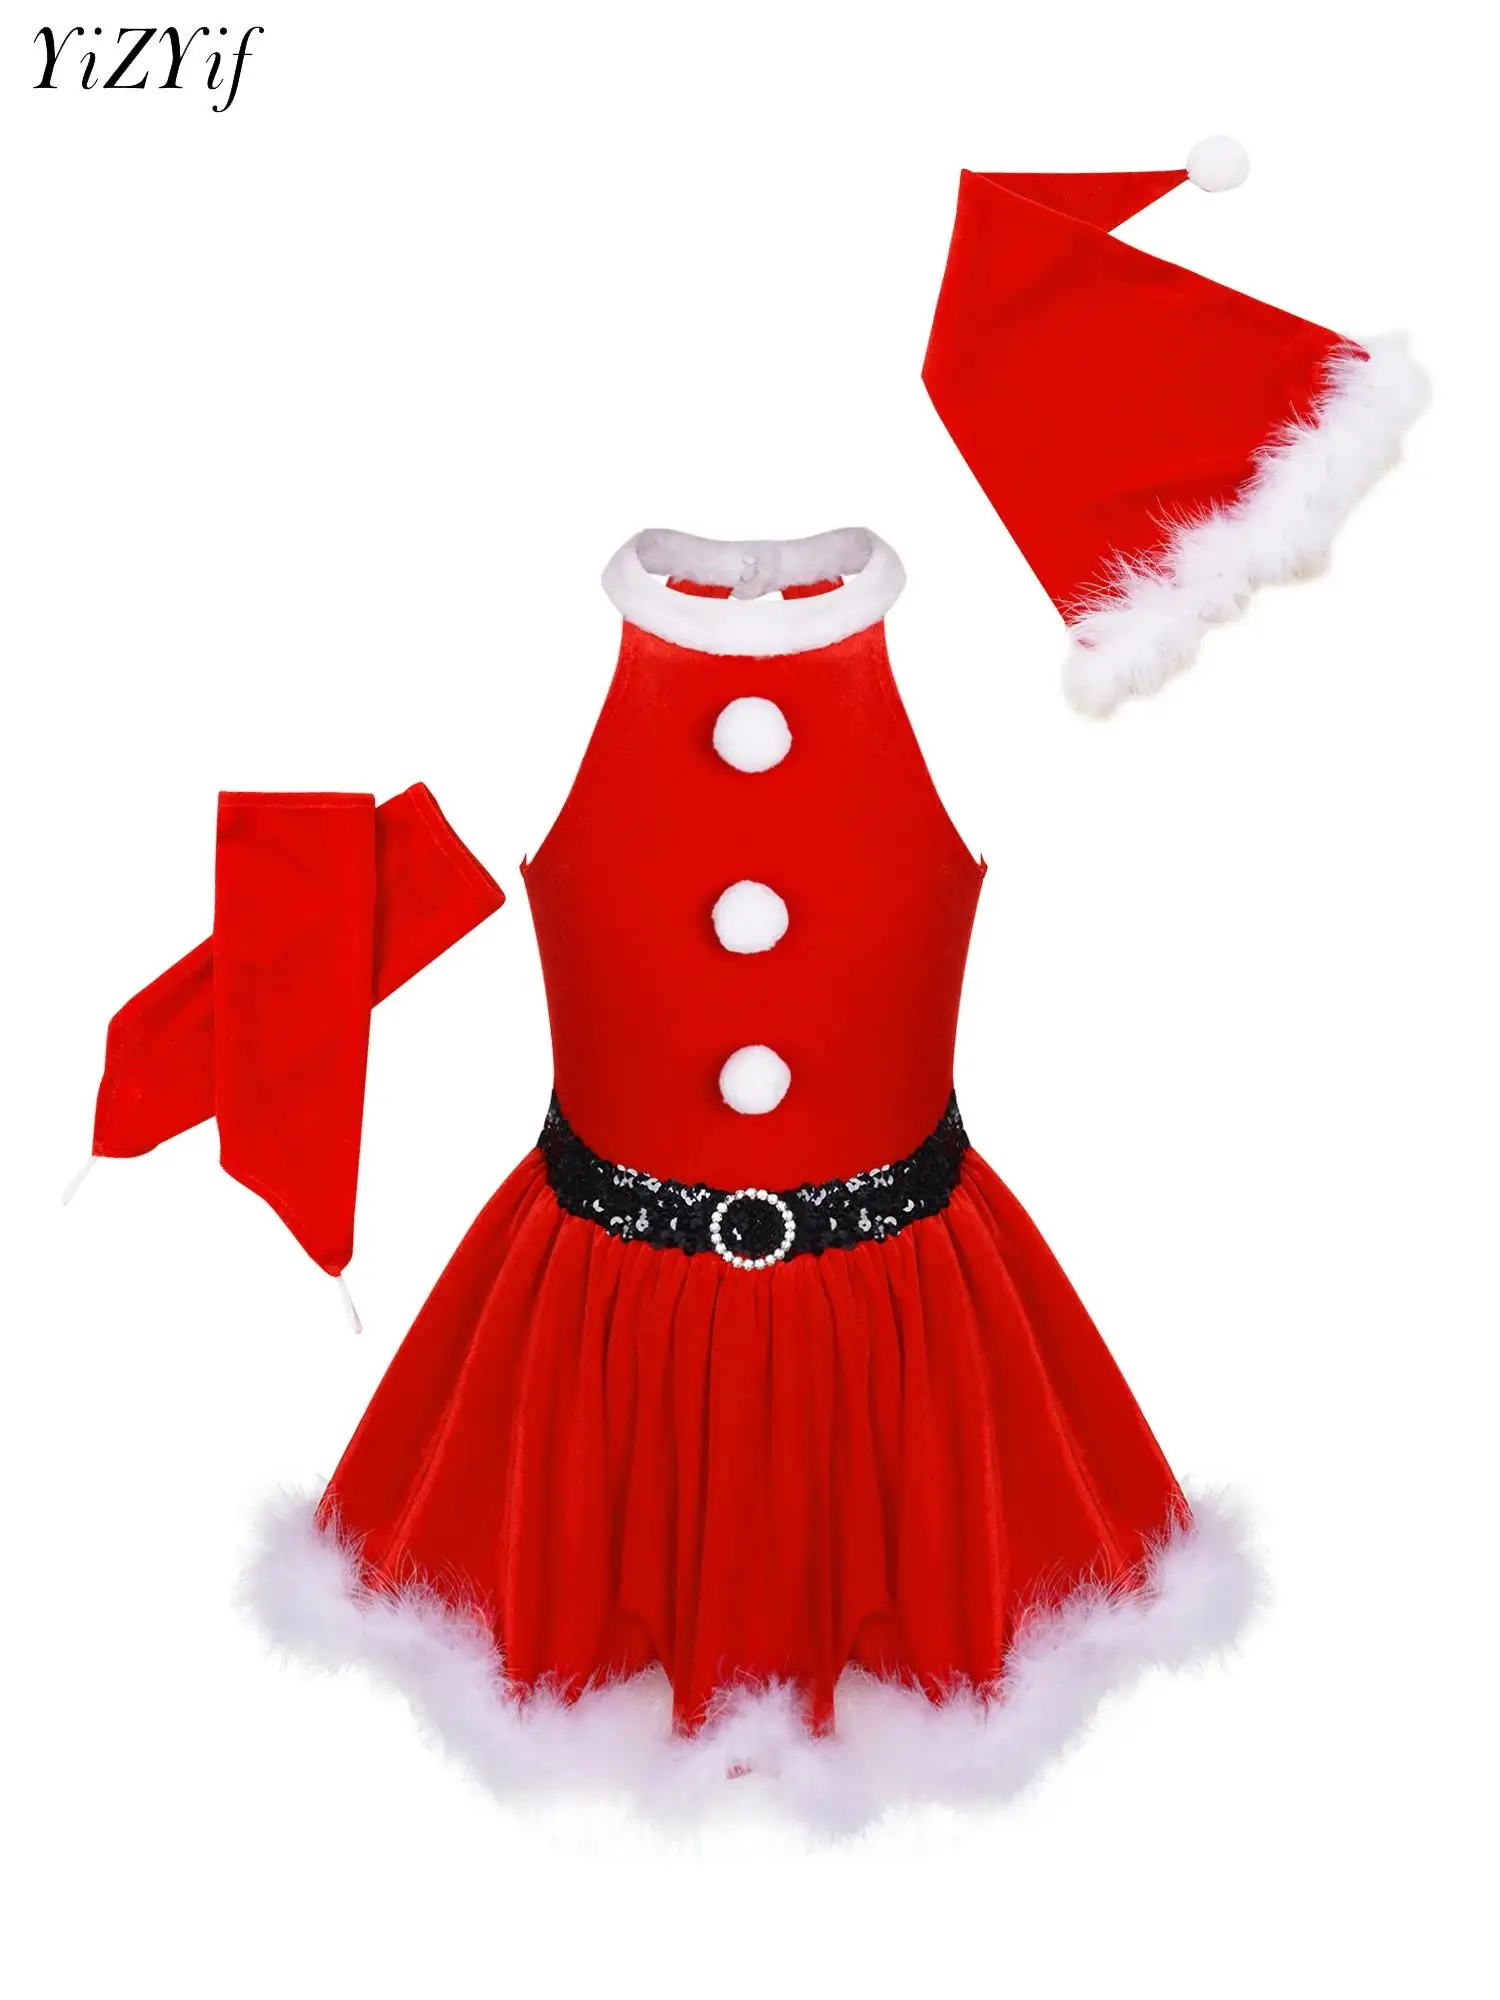 

Christmas Girls Santa Costume Ballet Dance Tutu Dress Figure Skating Xmas Mrs Claus Cosplay Theme Party Outfits with Hat Gloves